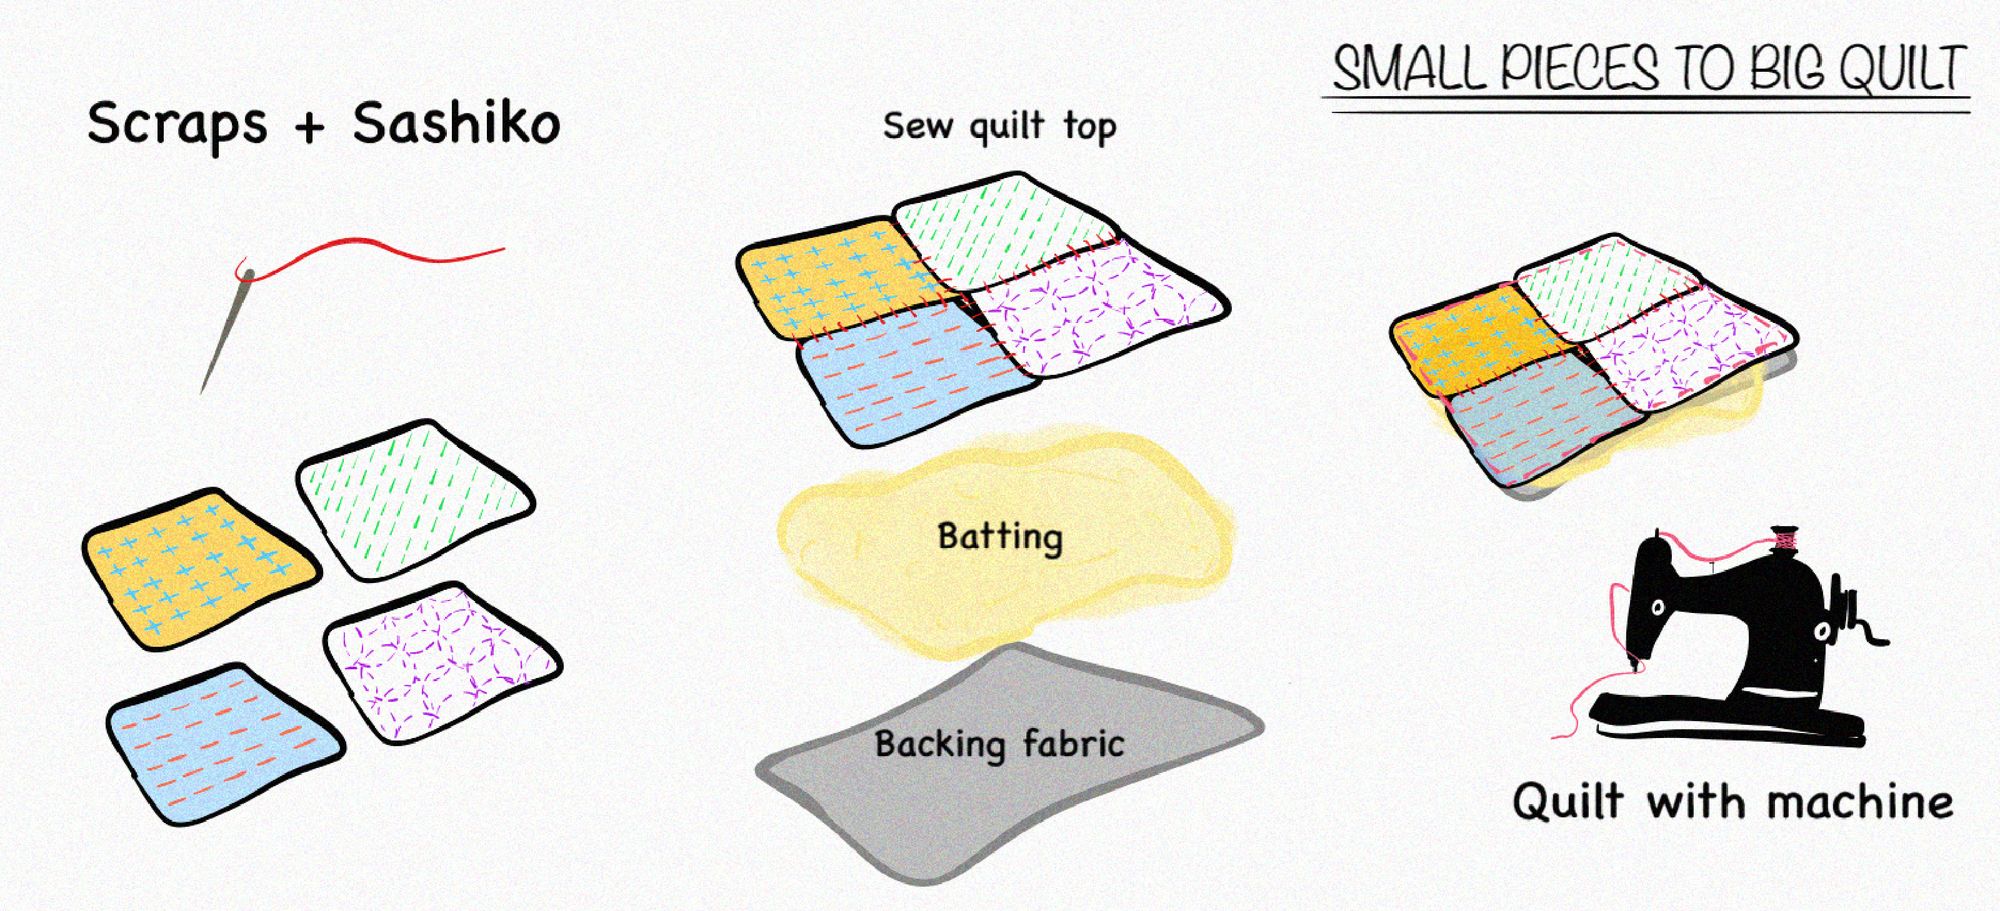 Instructions on how to make a quilt from small sashiko pieces.